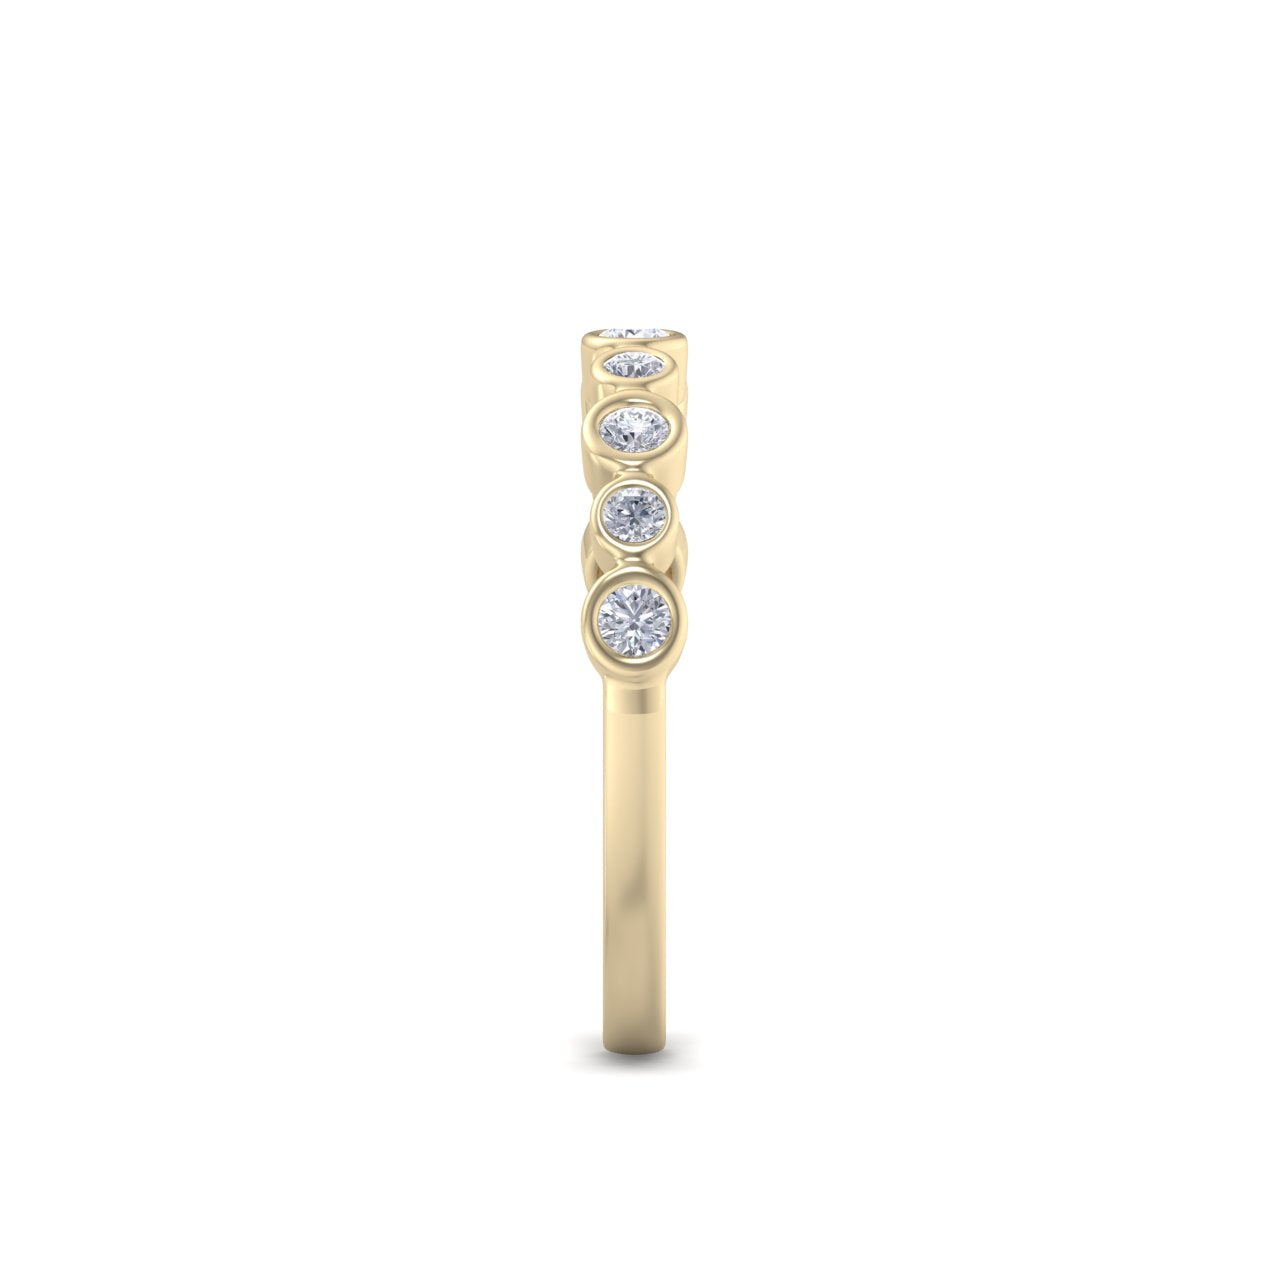 Wedding band in yellow gold with white diamonds of 0.25 ct in weight